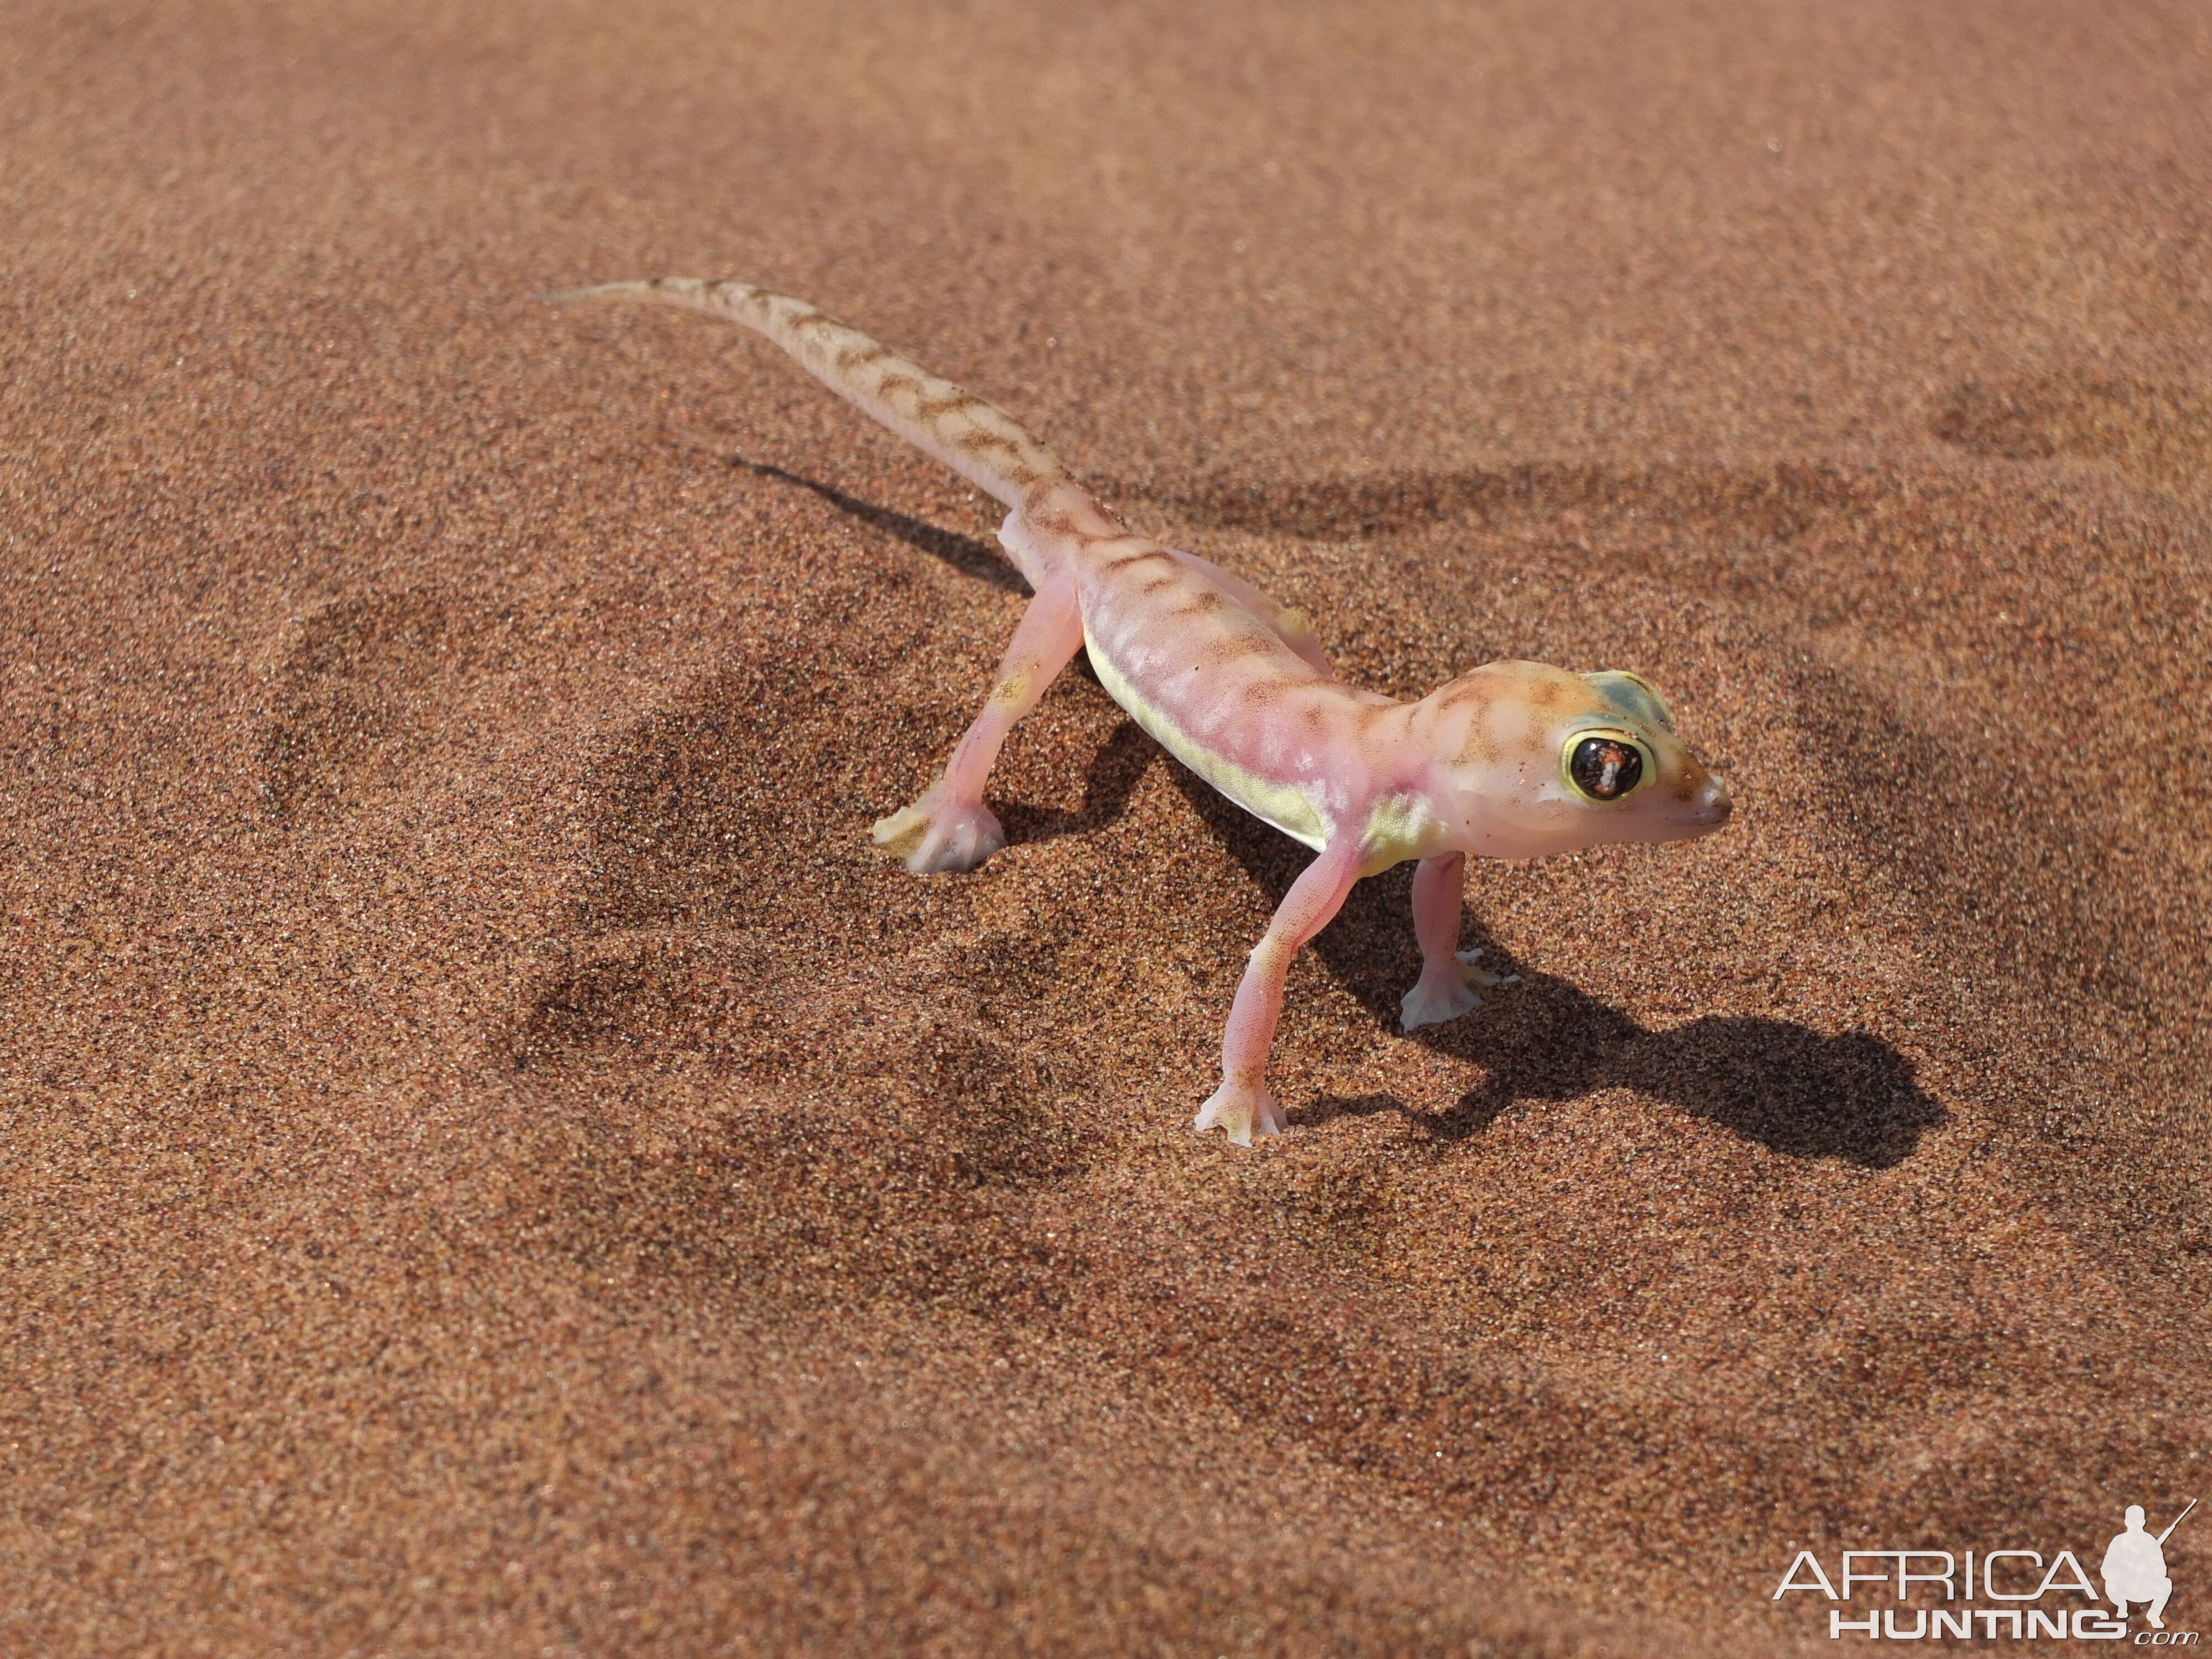 Web-Footed Gecko